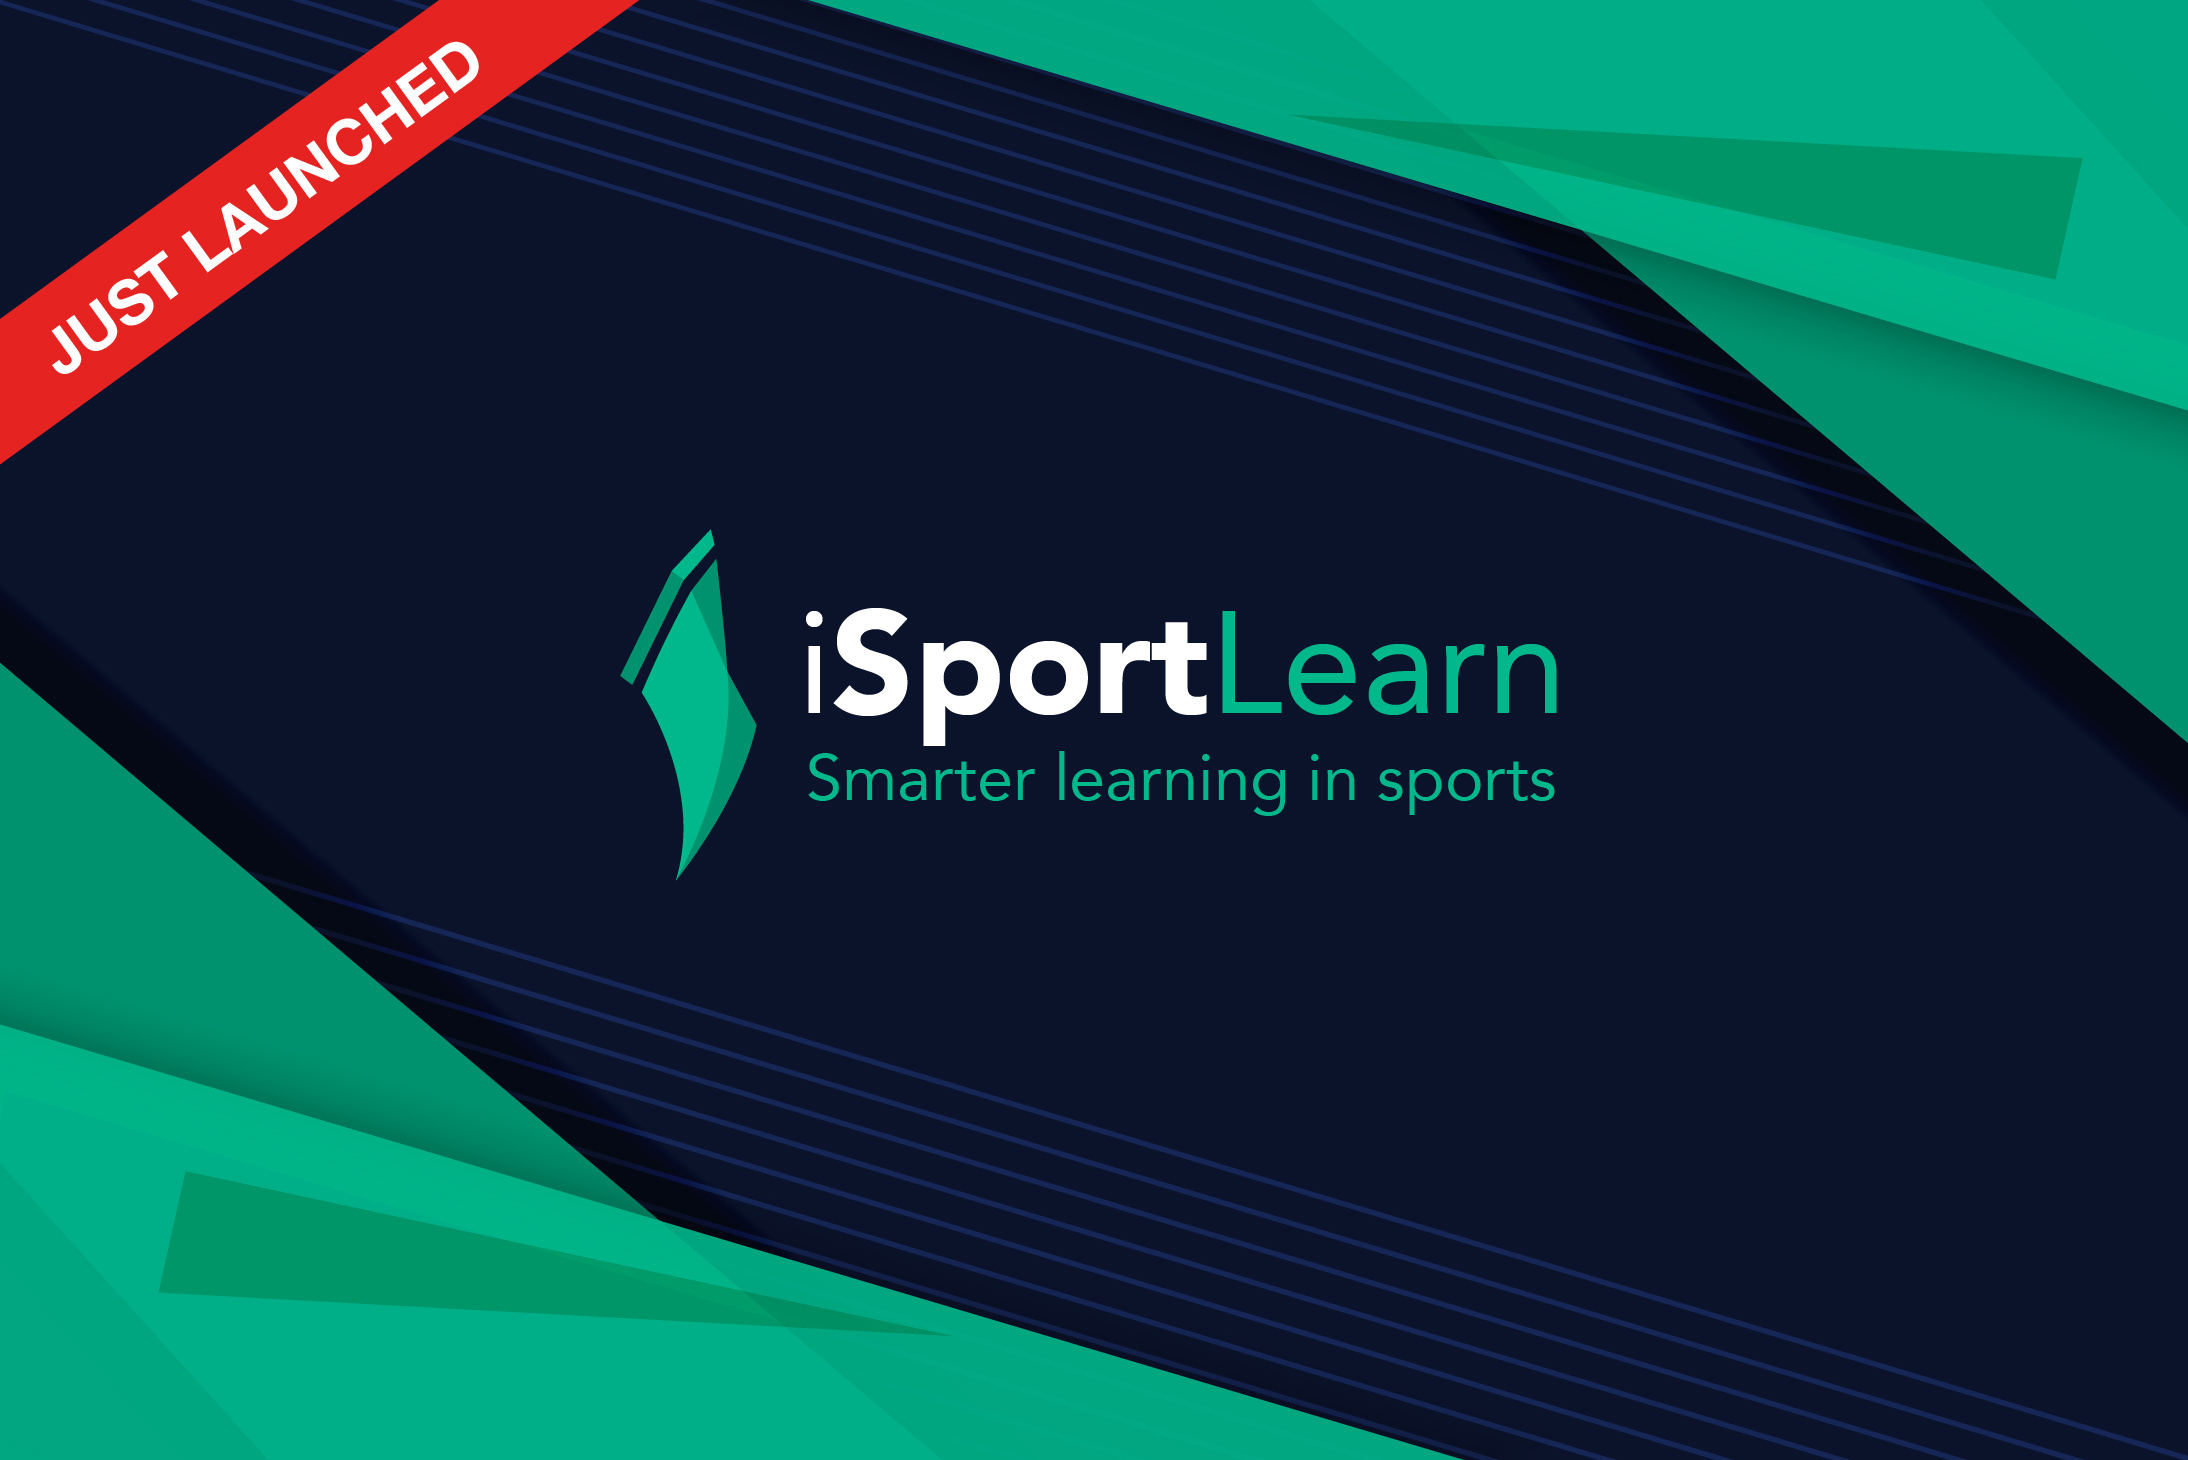  iSportLearn Launches With The Goal Of Changing The Sports Industry For The Better